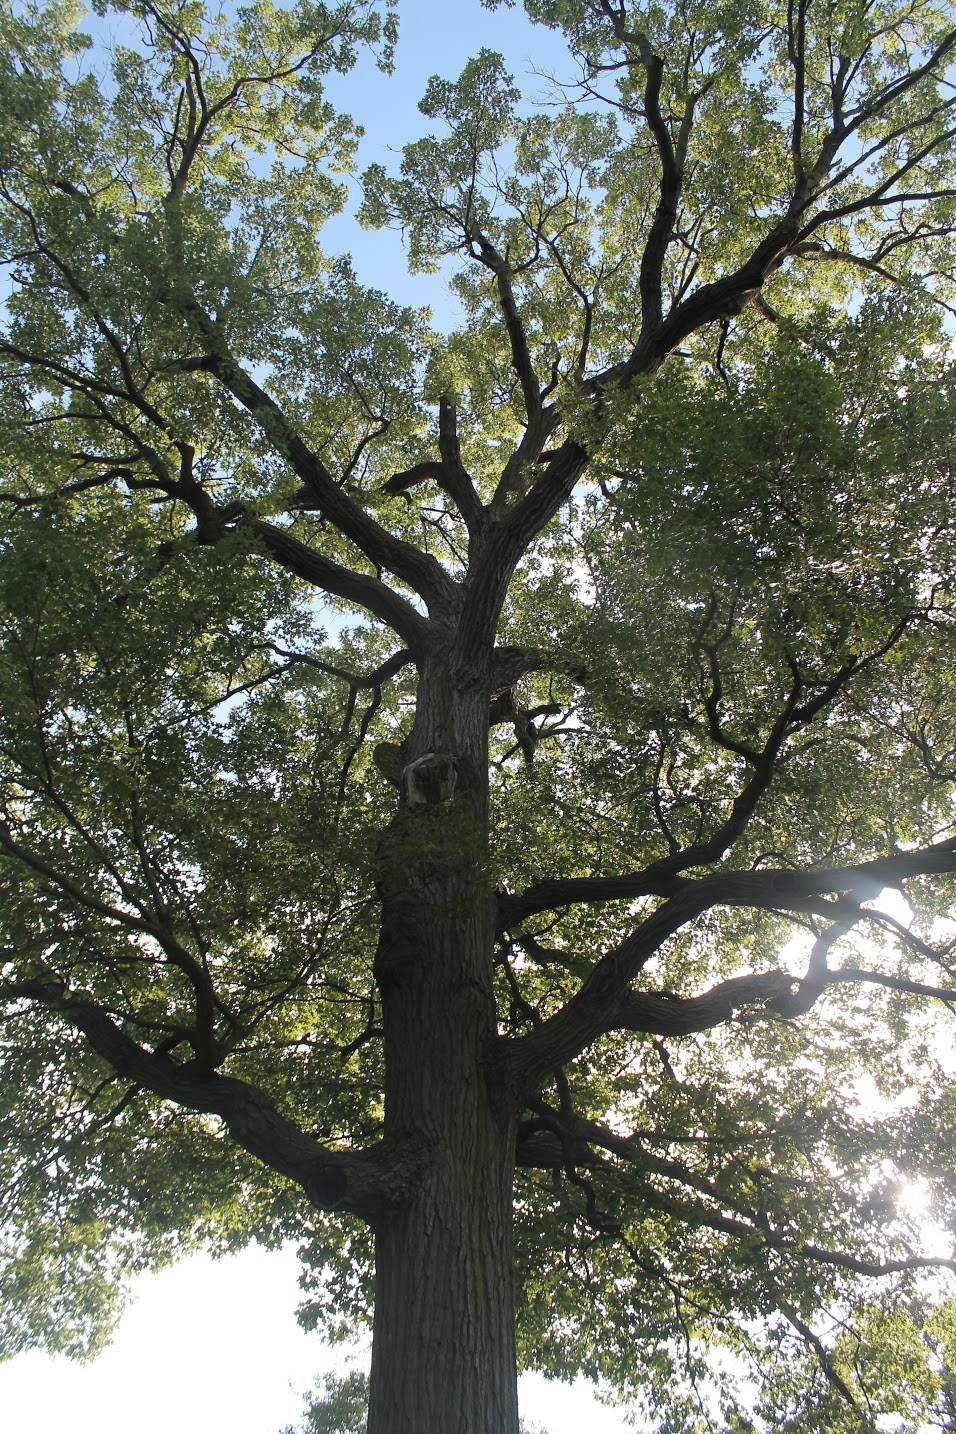 An enormous tree at Ambucs Park, seen from a view from the base looking up towards the sky and branches. The leaves are green and the branches are brown. Photo by Maddie Rice.